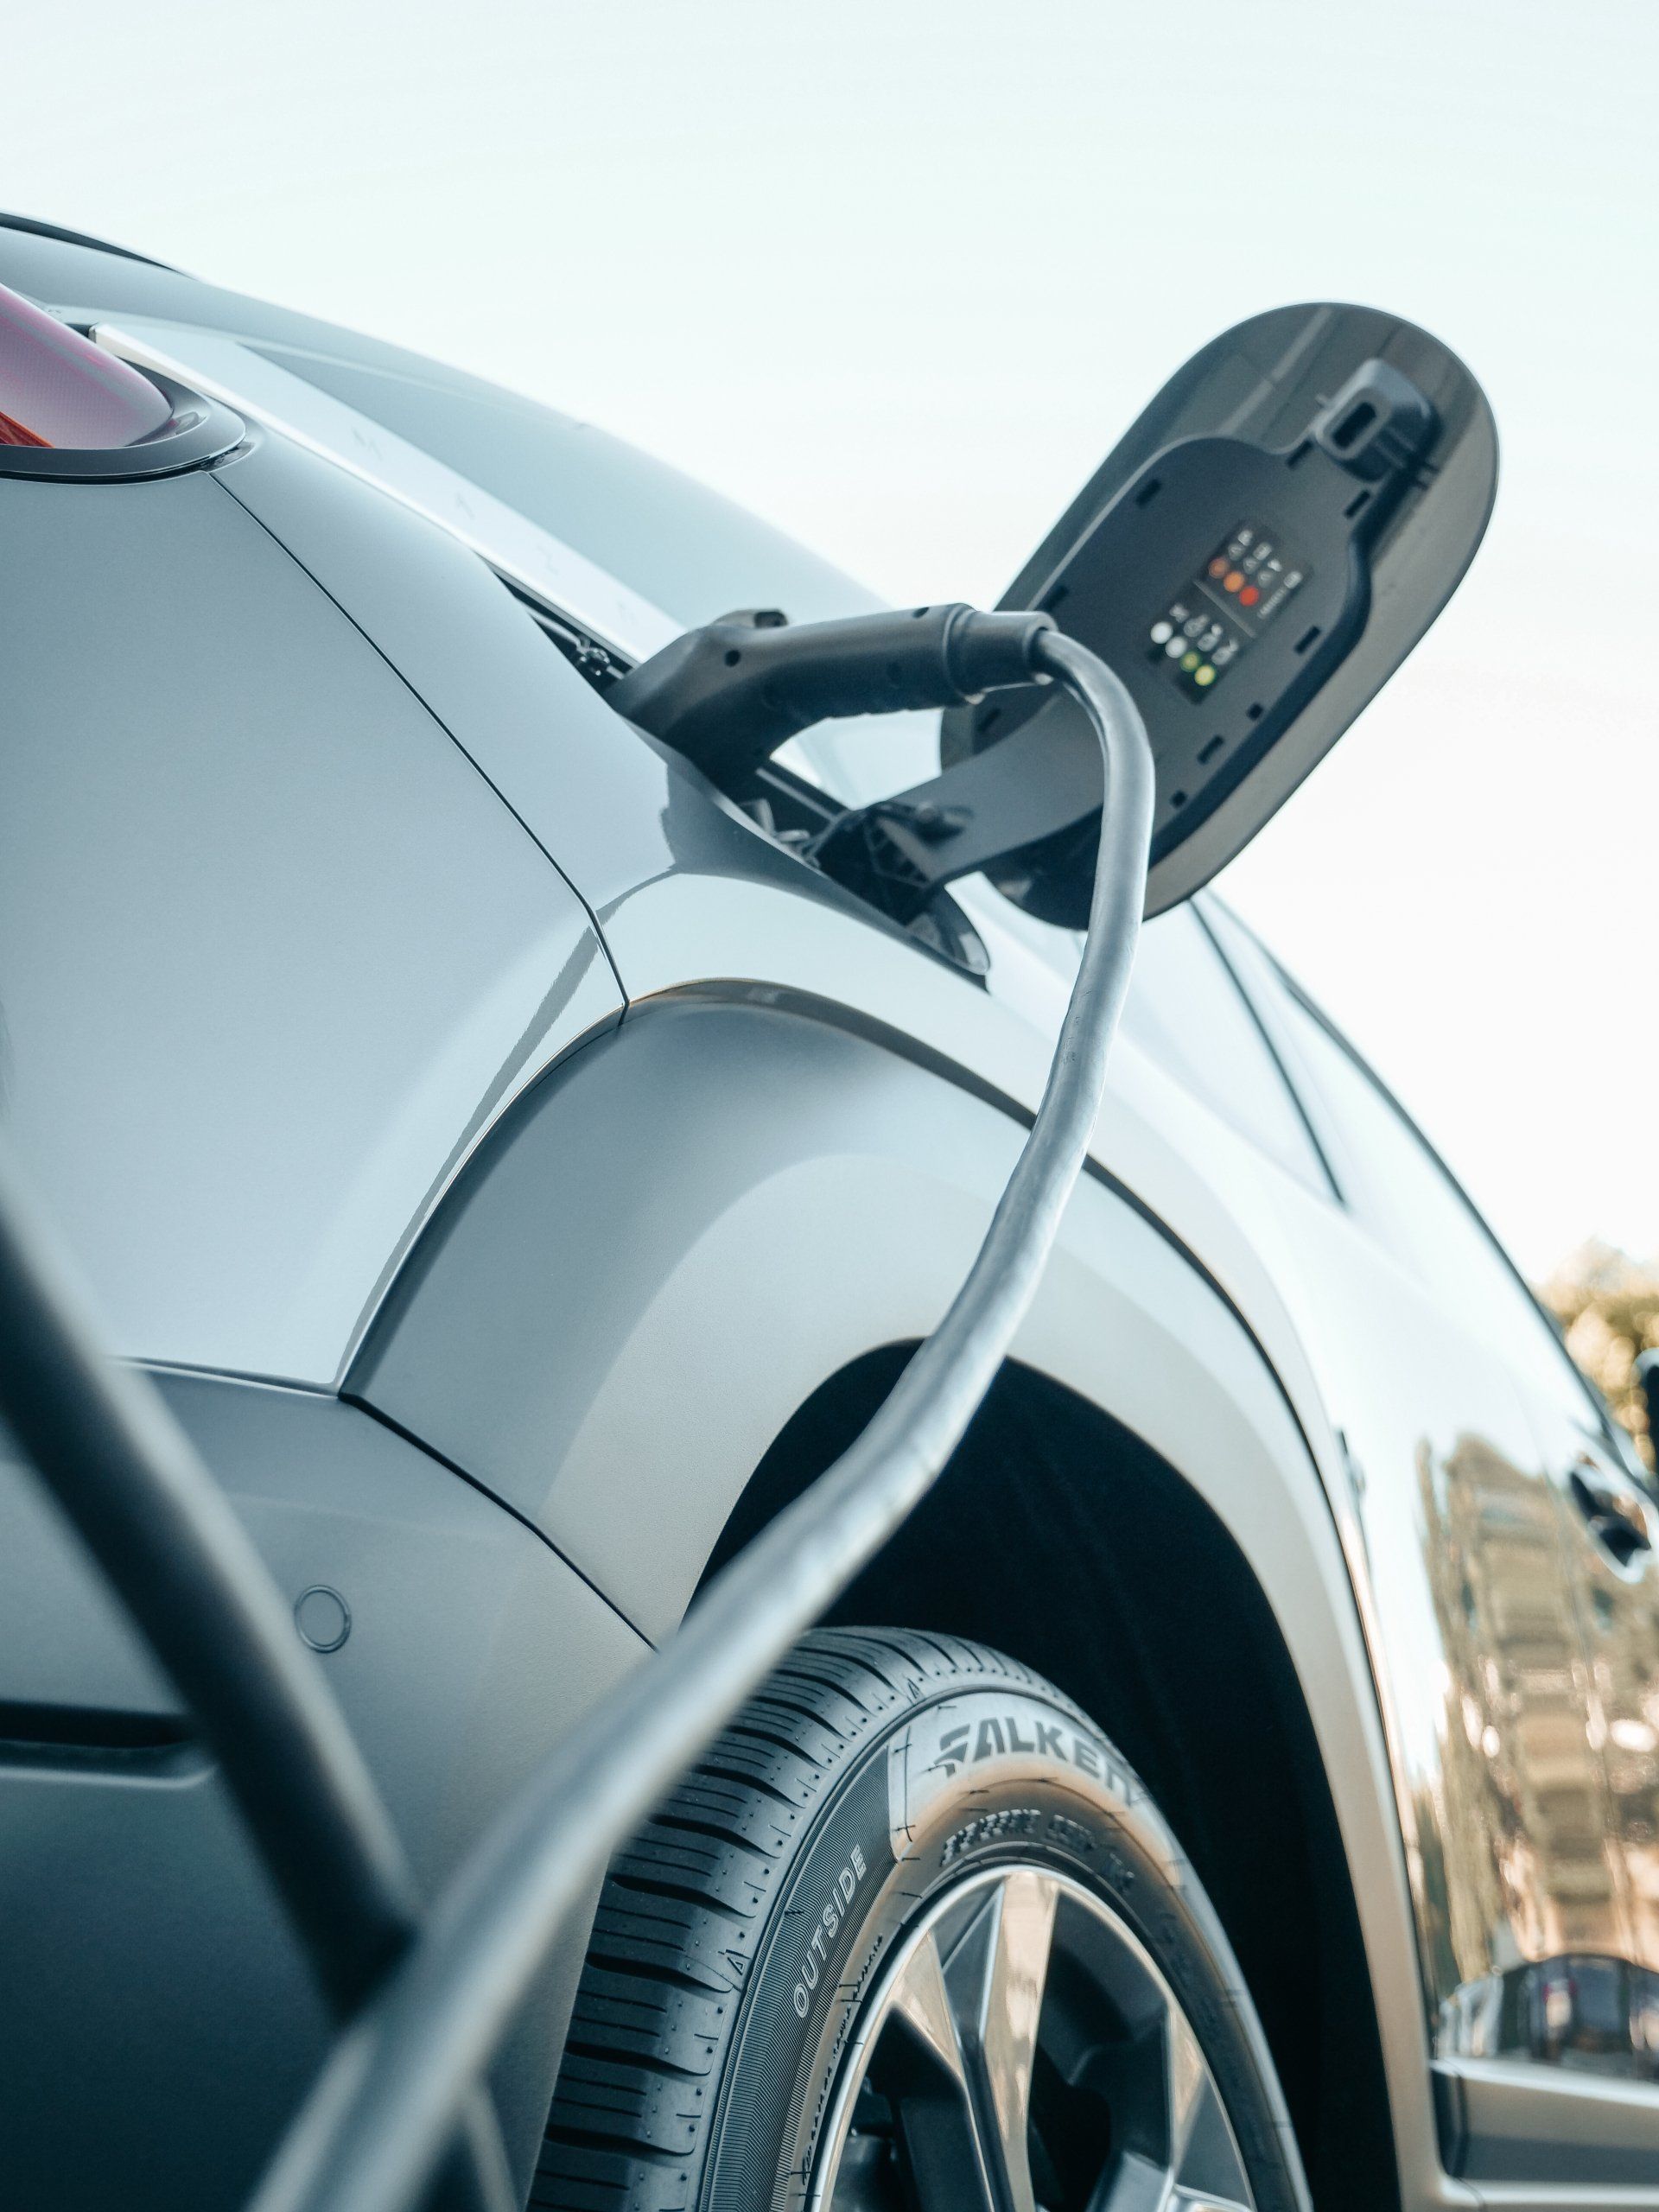 Do electric and hybrid cars need servicing?